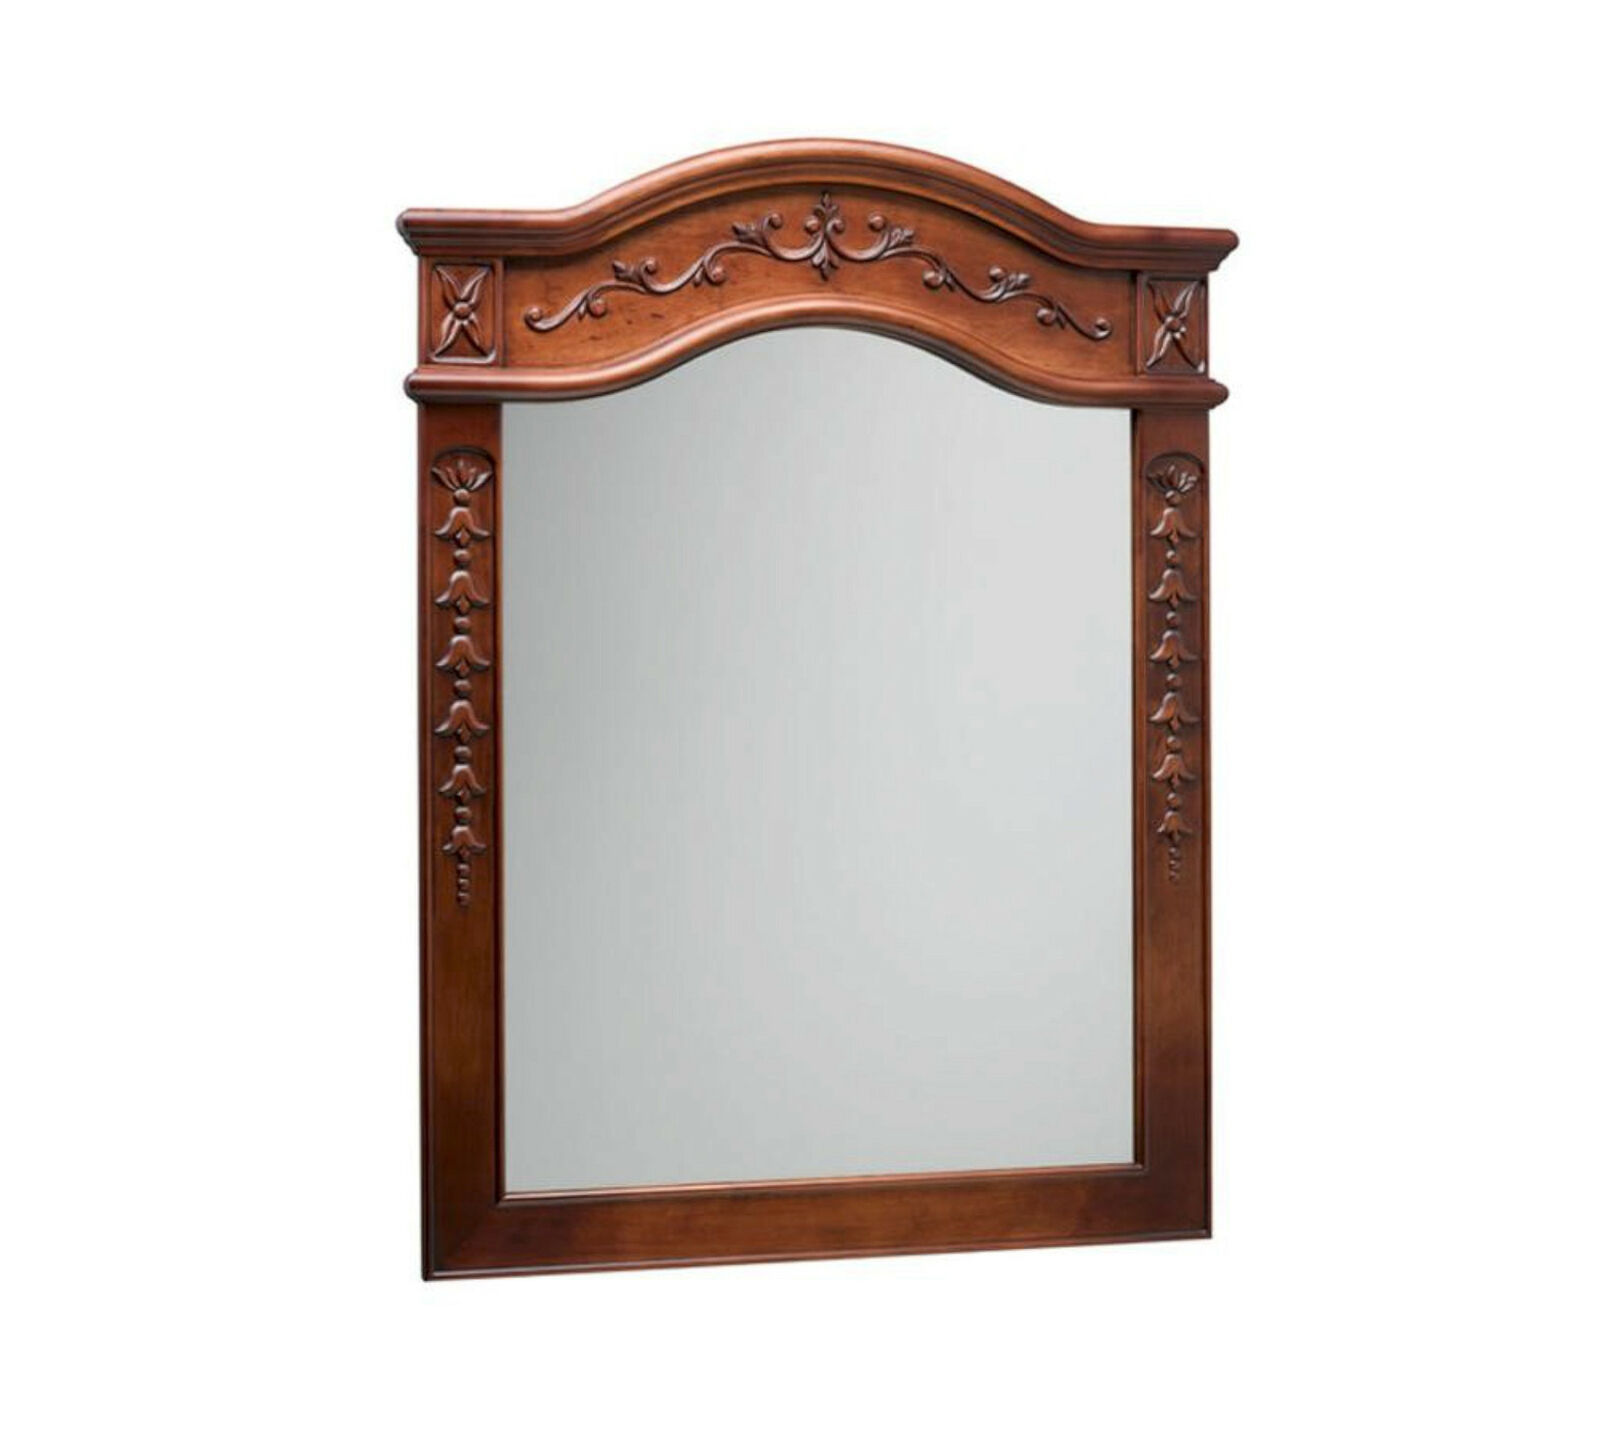 Primary image for NEW Ronbow 607230-F11 Bordeaux Mirror with Solid Wood Frame Colonial Cherry